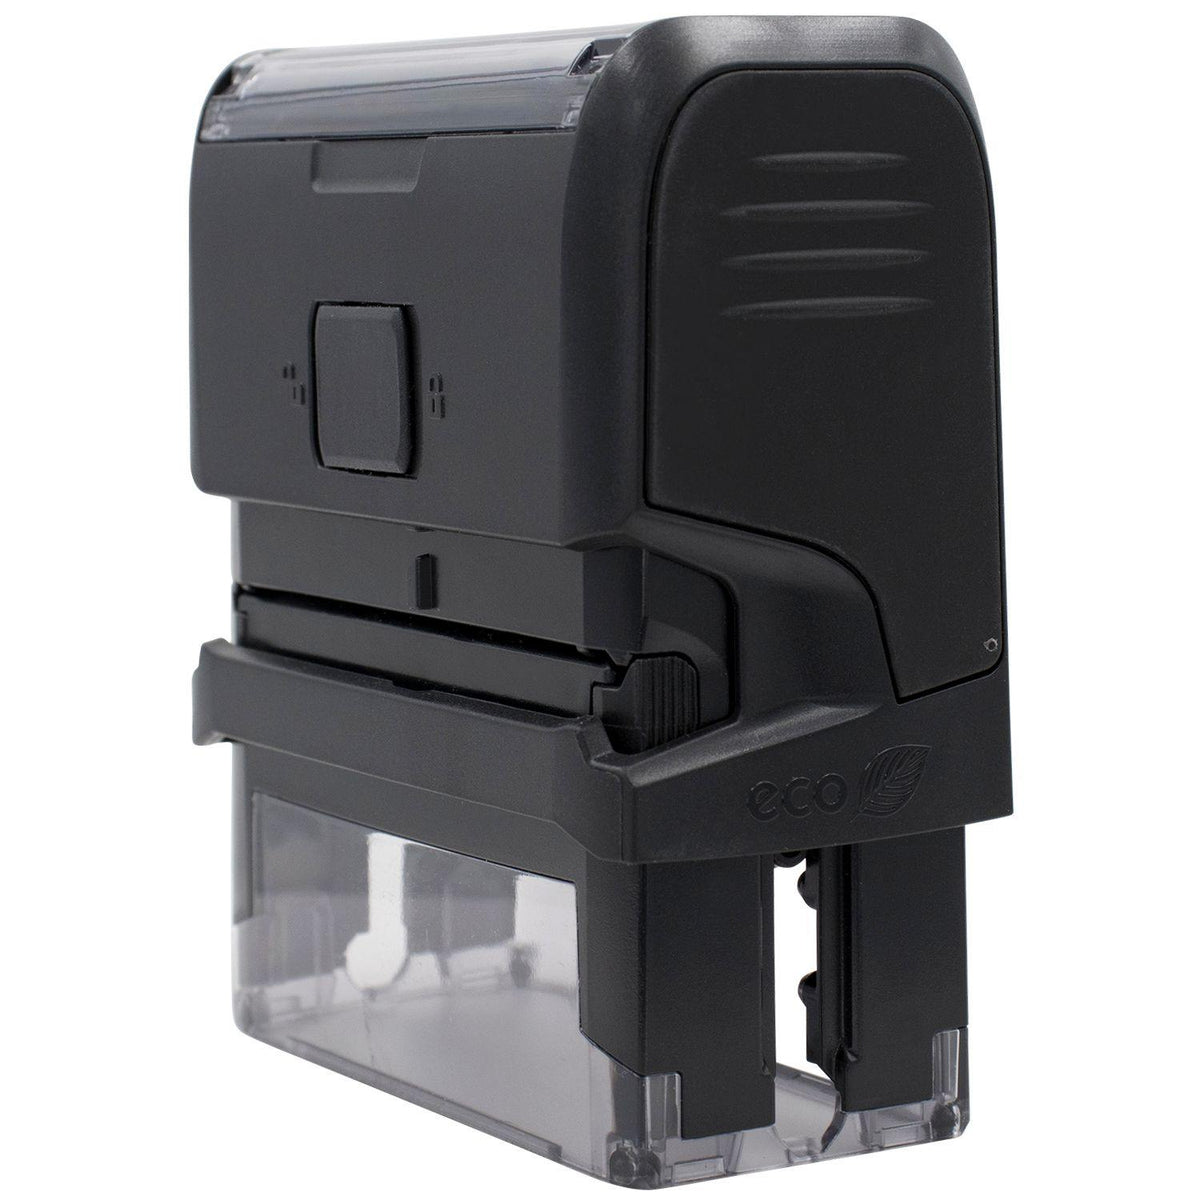 Side View of Large Self Inking Completed Together Stamp at an Angle